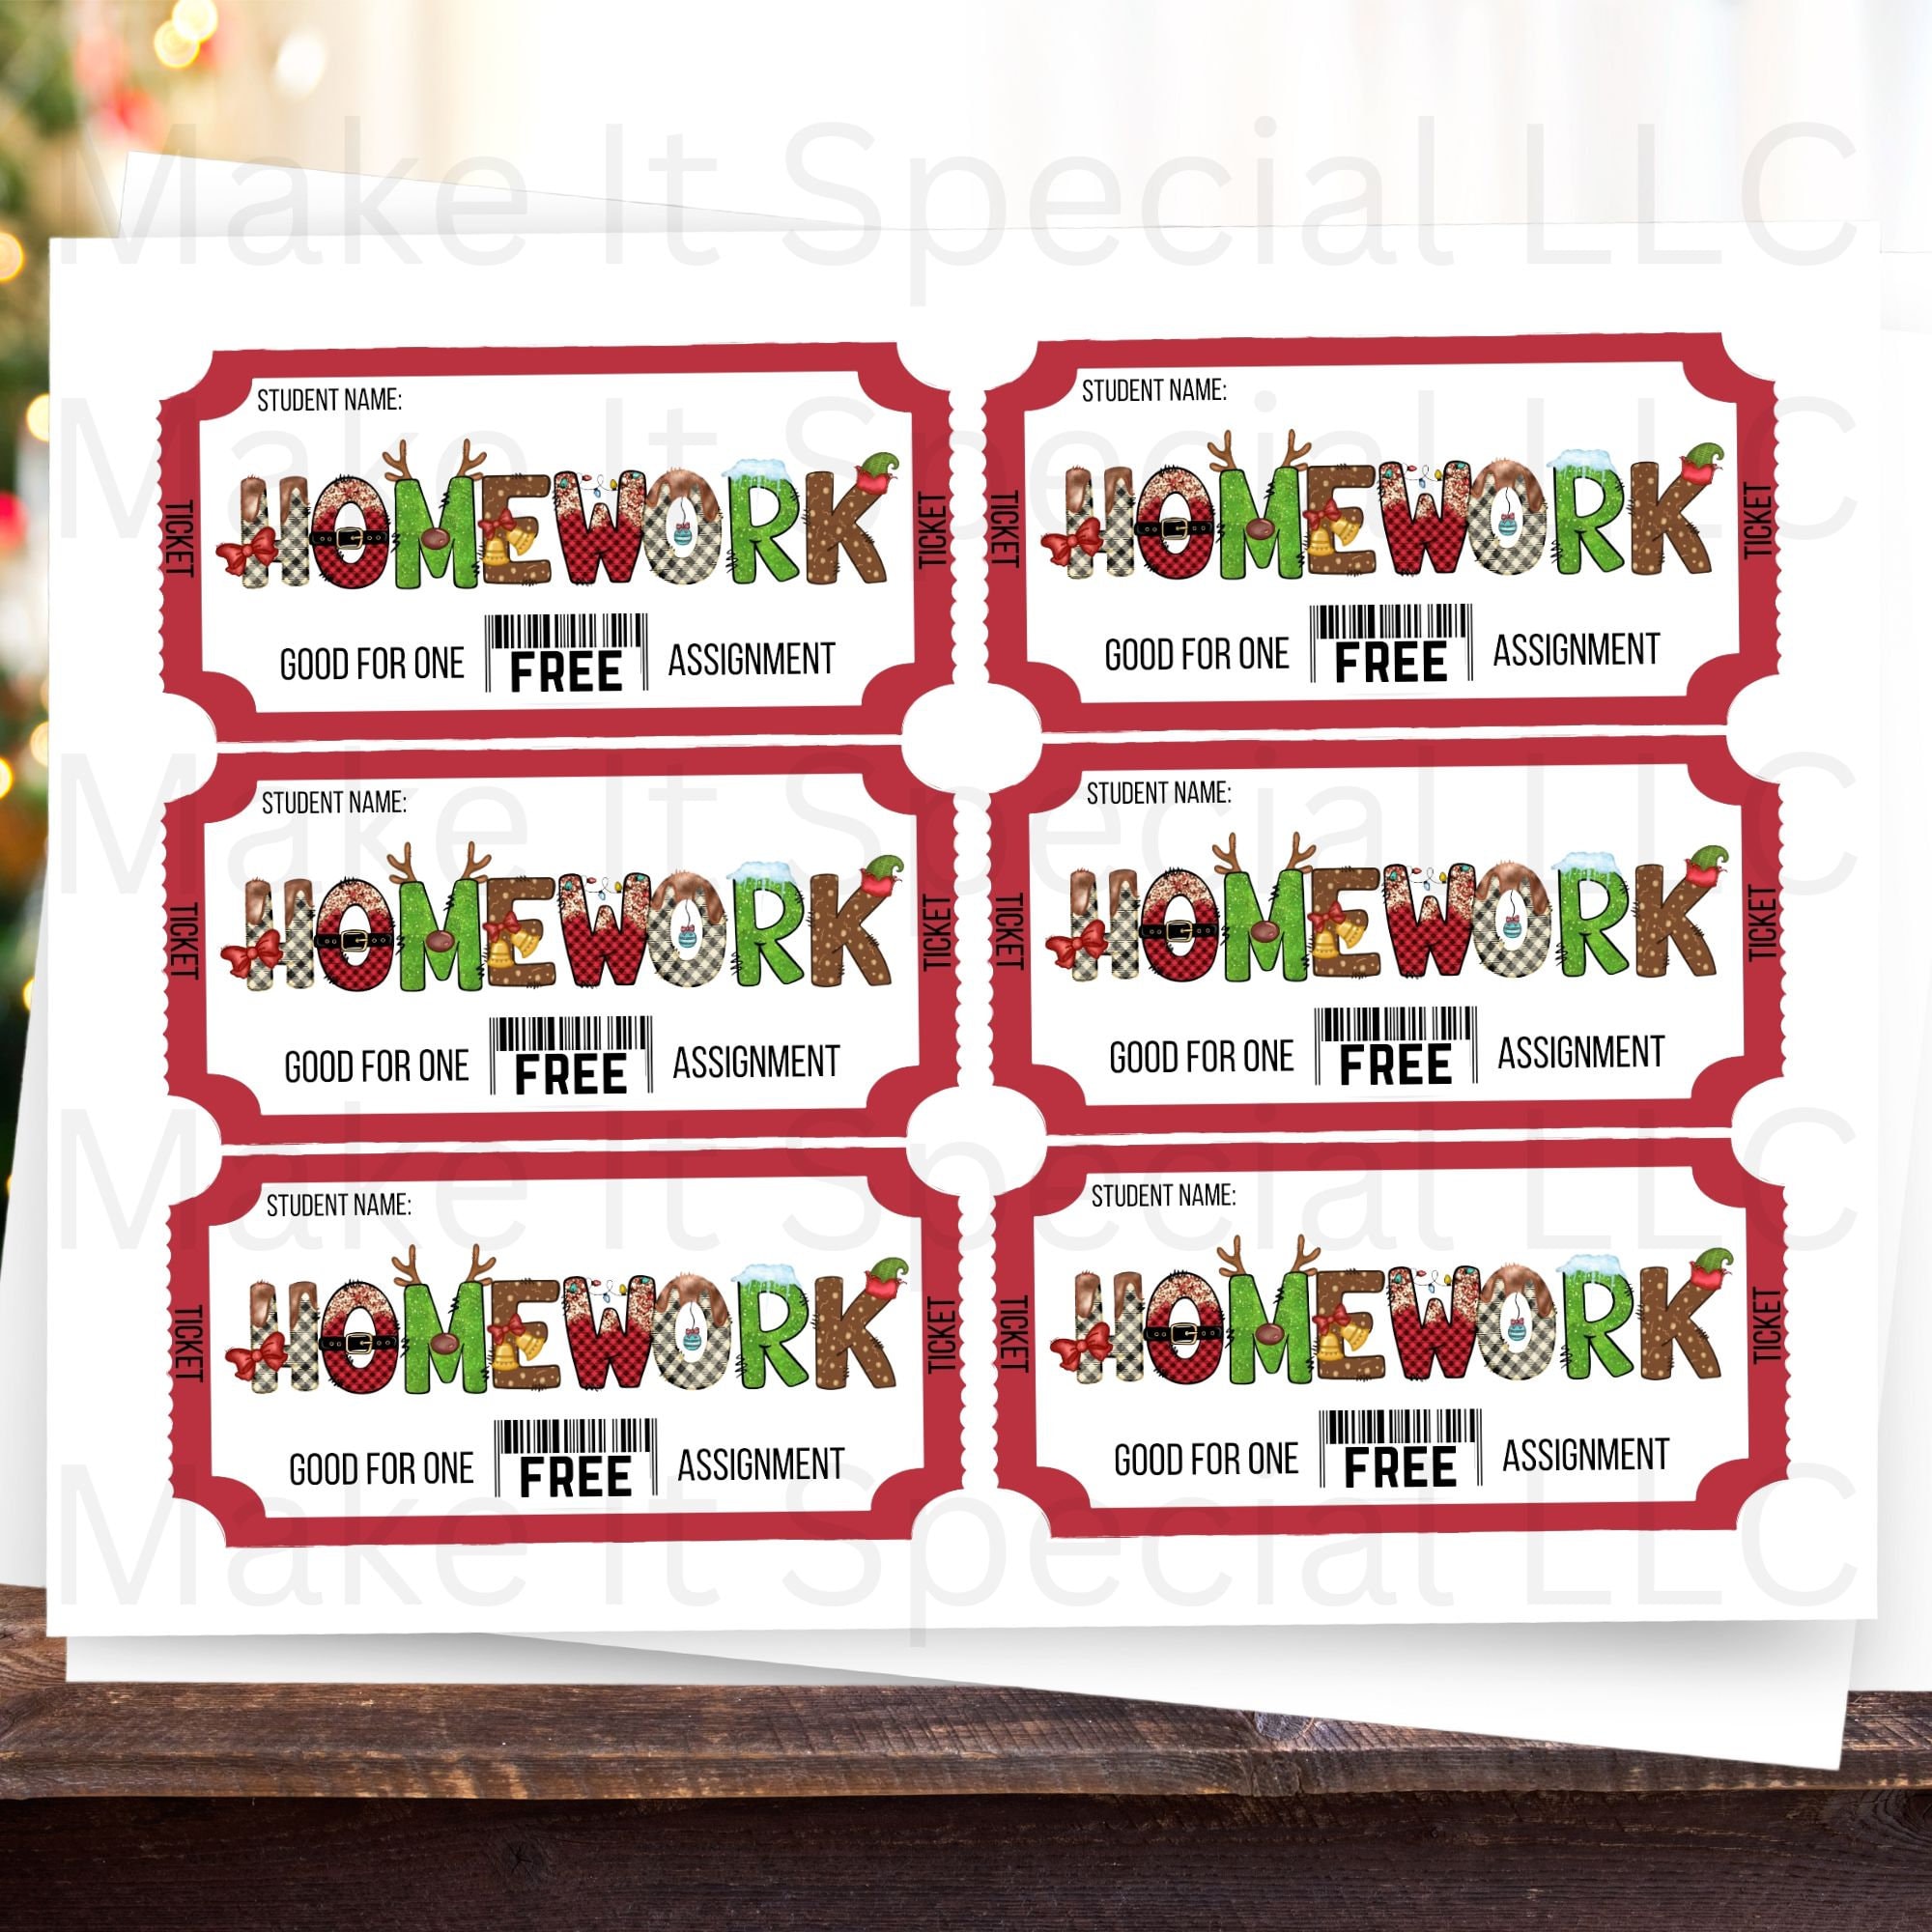 Be DifferentAct Normal: Printable Homework Organizer [Back To